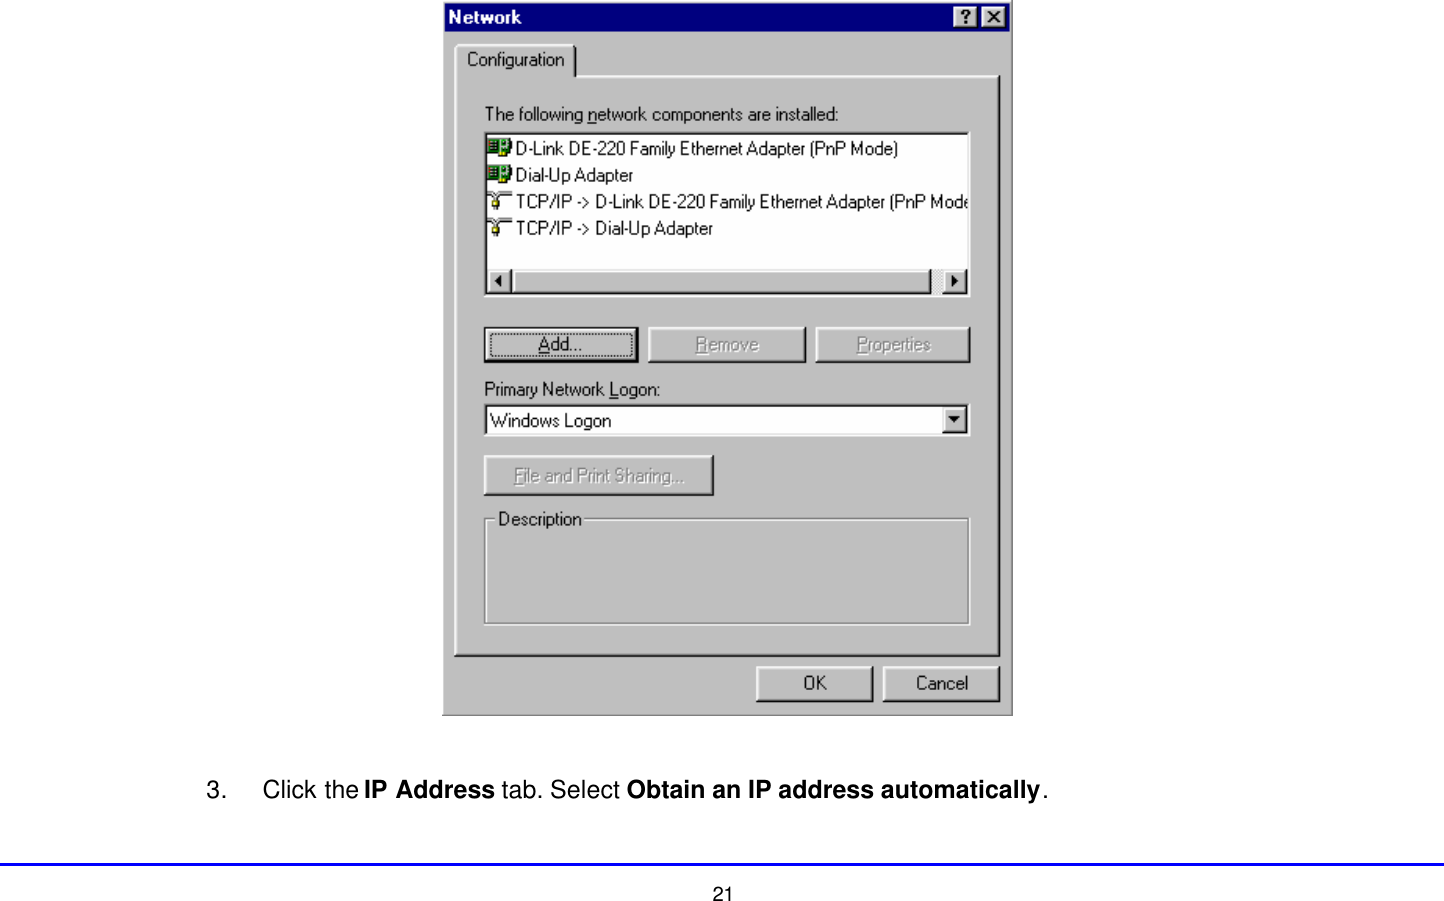  21   3. Click the IP Address tab. Select Obtain an IP address automatically.  